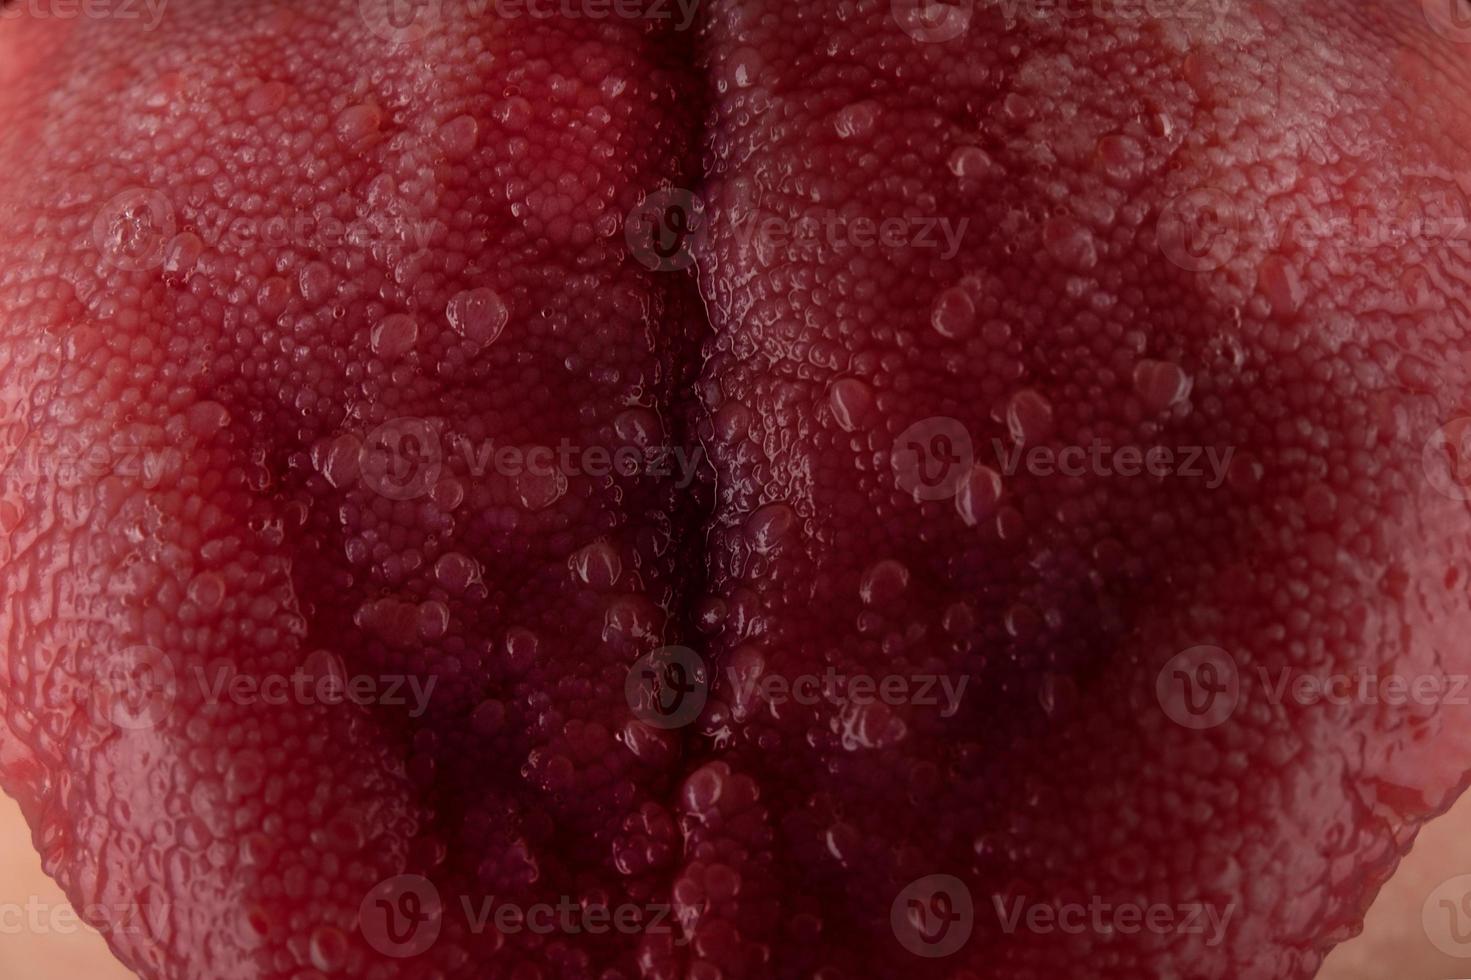 Tongue with stomatitis close up, oral cancer photo